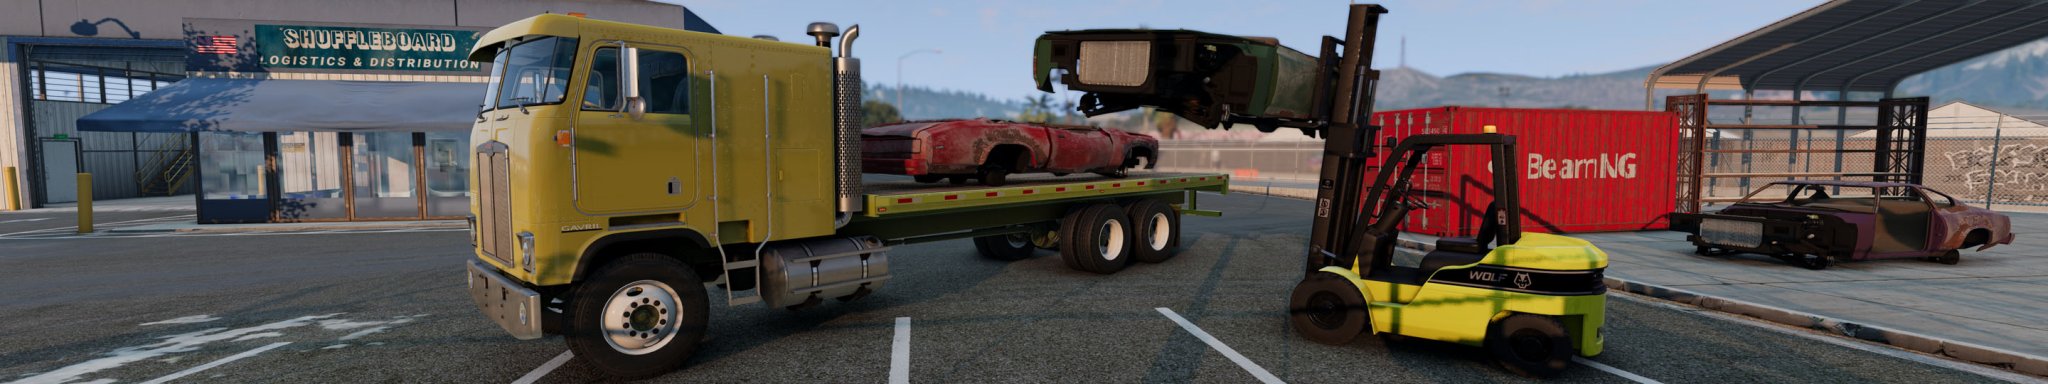 1 BeamNG CRUSHED CARS to HOT ROLLED Inc STEEL copy.jpg